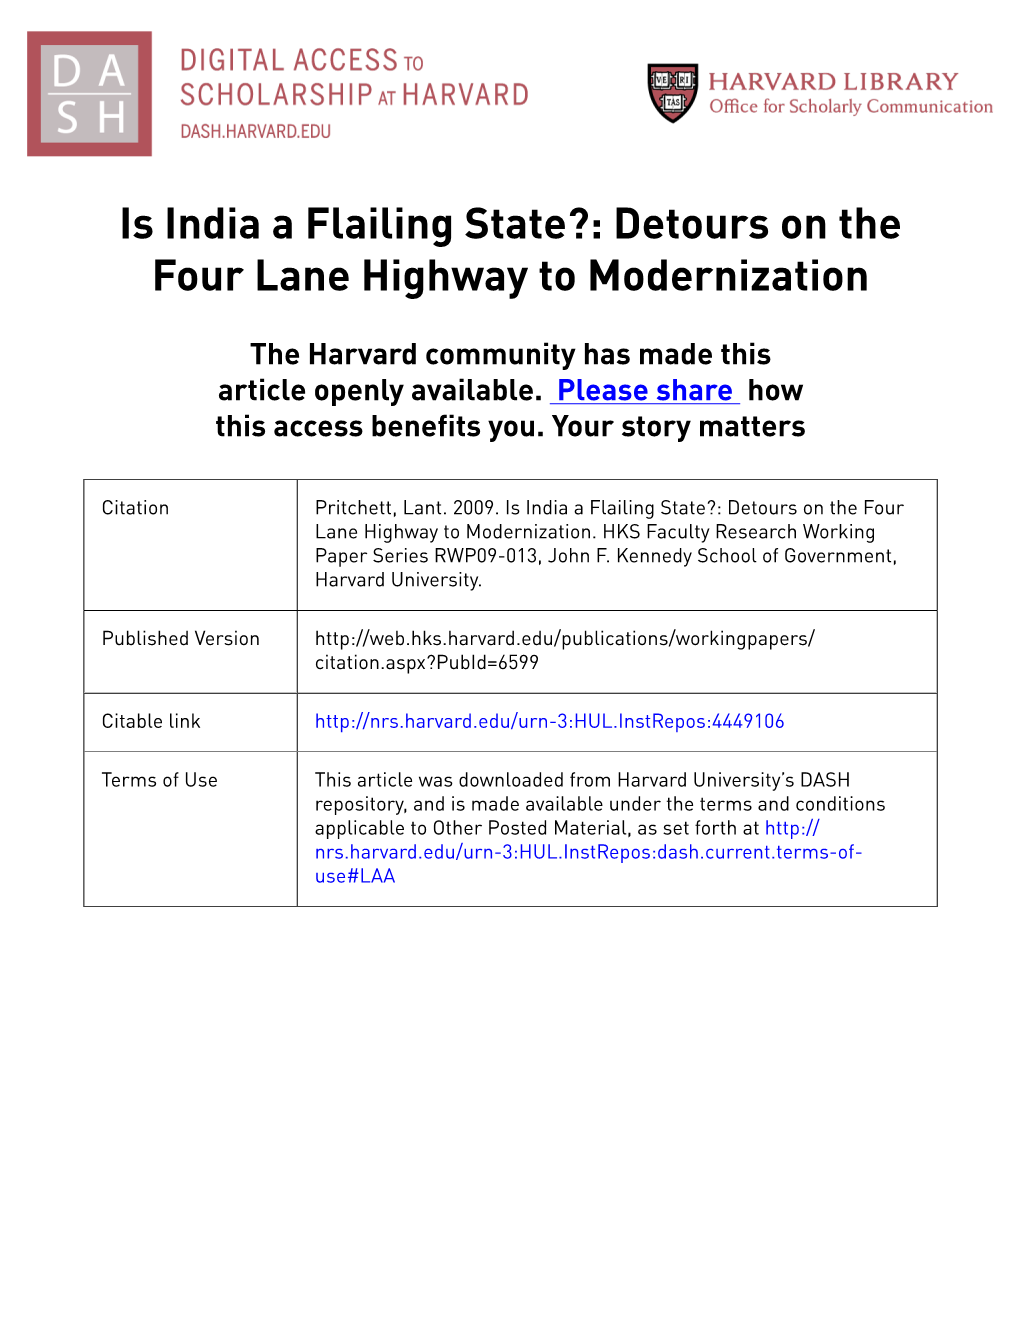 Is India a Flailing State?: Detours on the Four Lane Highway to Modernization